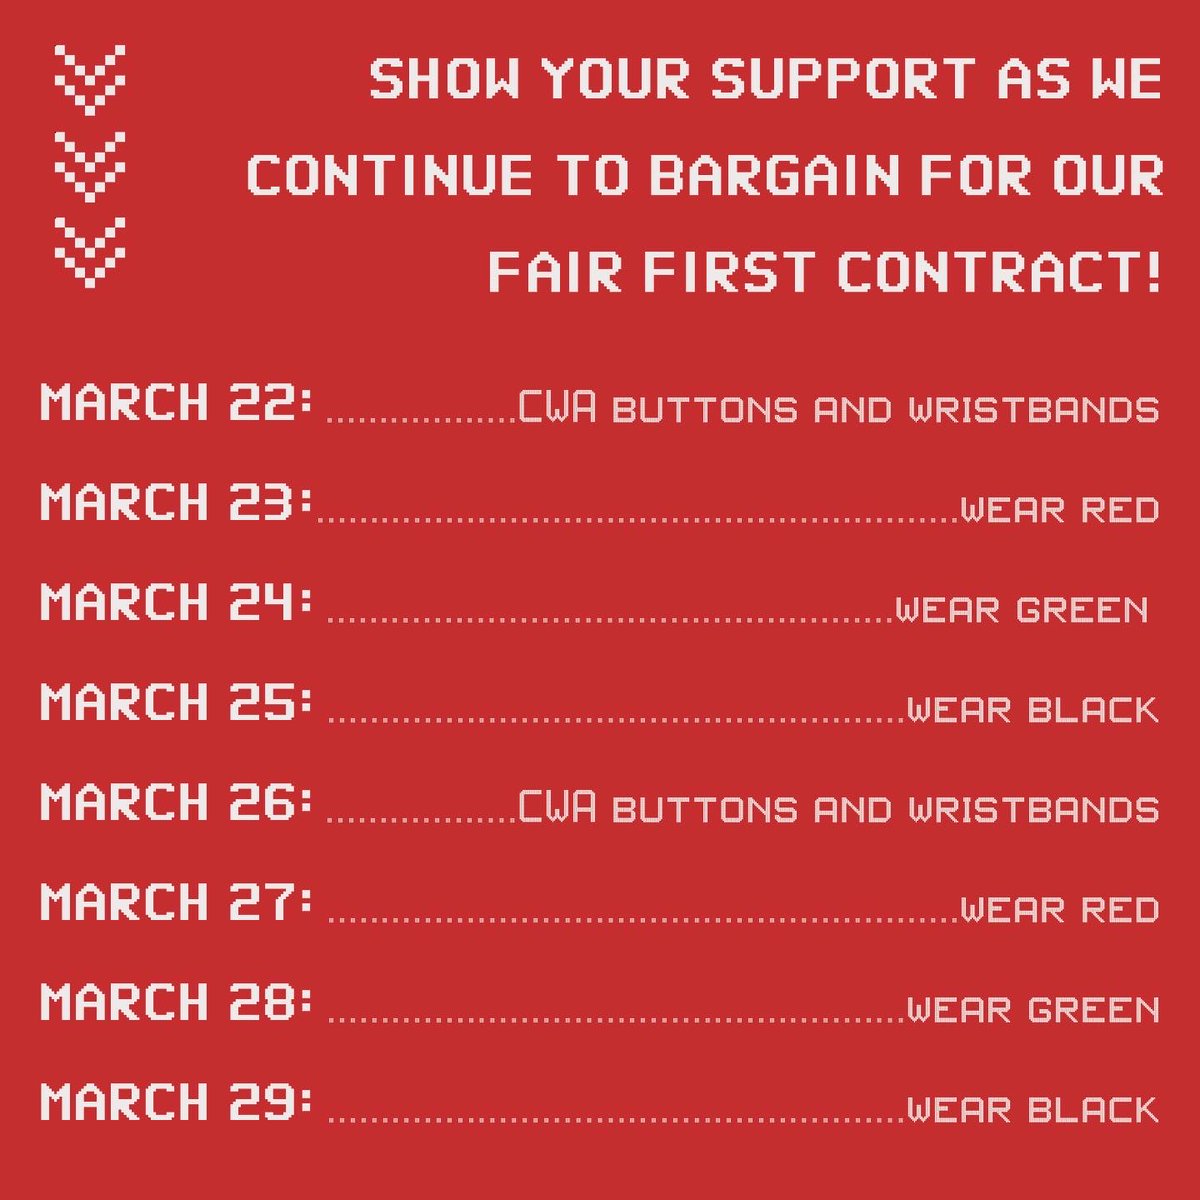 We are looking forward to our next round of bargaining for our fair first contract! Show us you stand with us! ✊🏽 #cwa